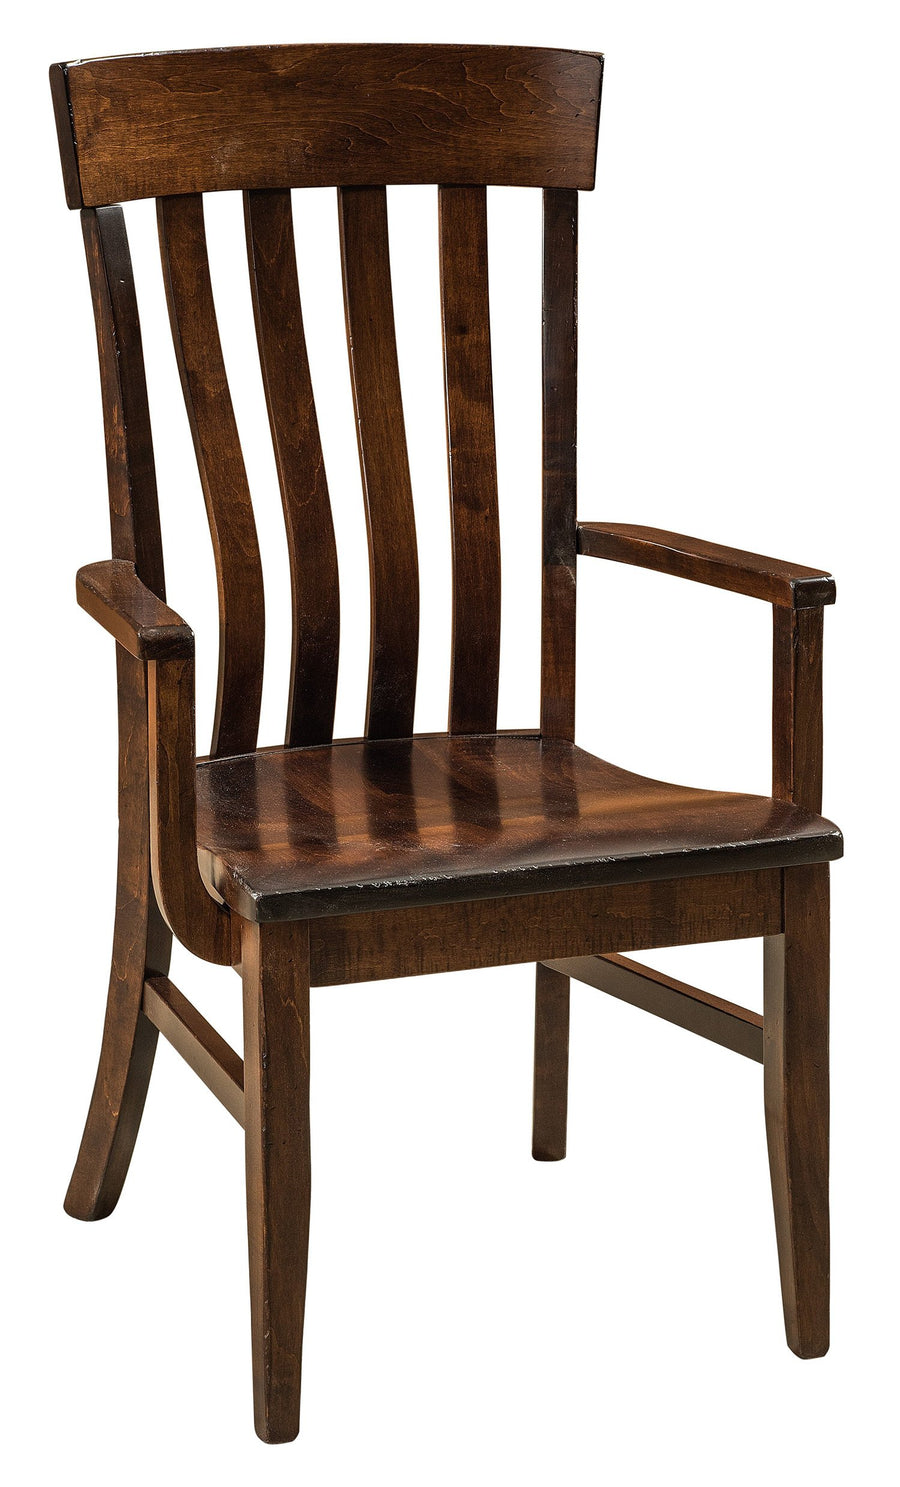 Galena Amish Arm Chair - Foothills Amish Furniture